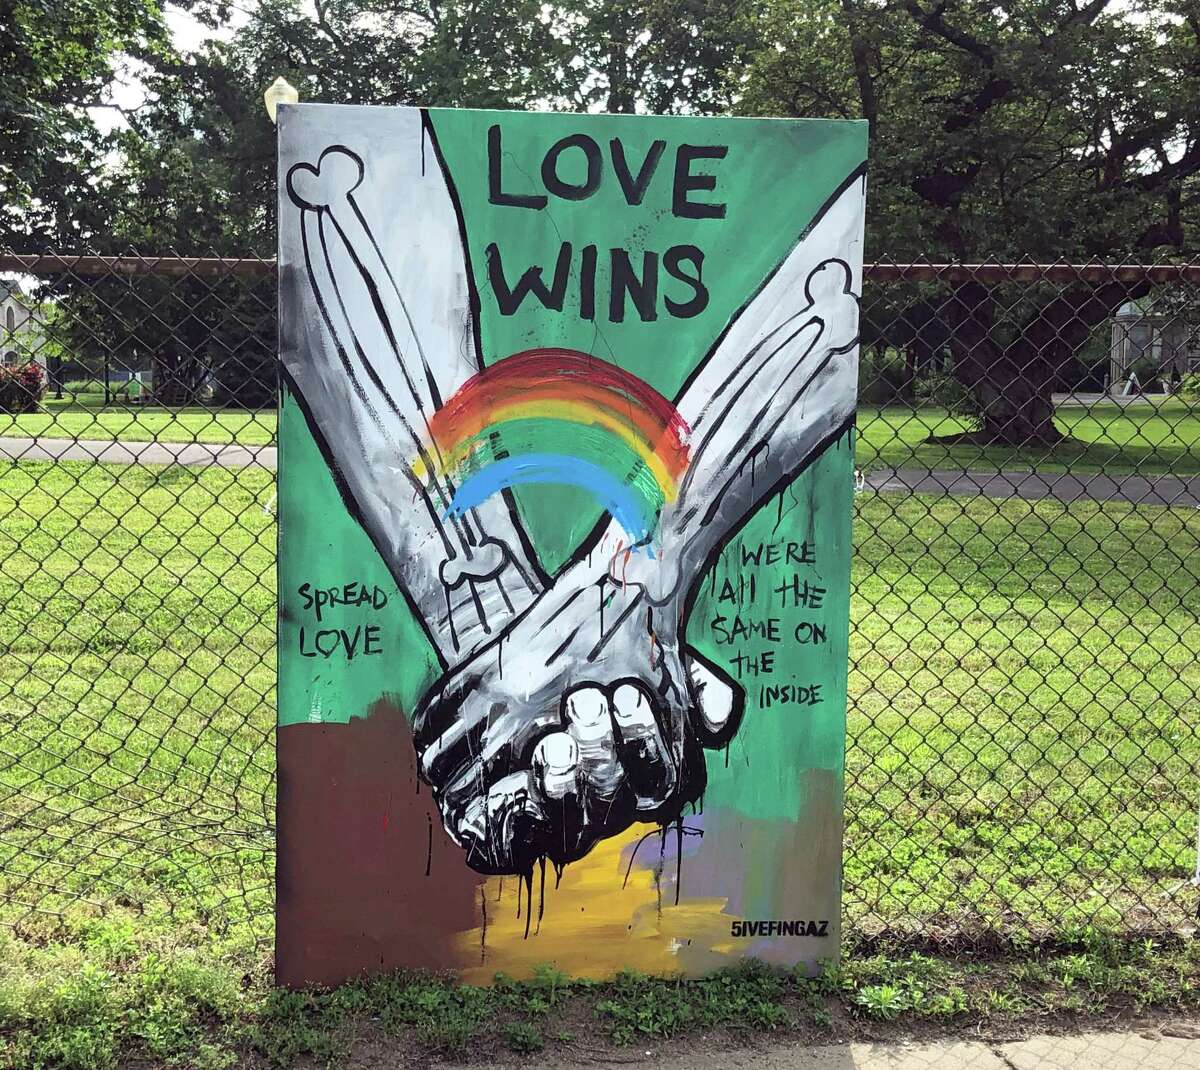 Artwork places in Mathews Park by local artist 5iveFingaz on June 6, 2019.